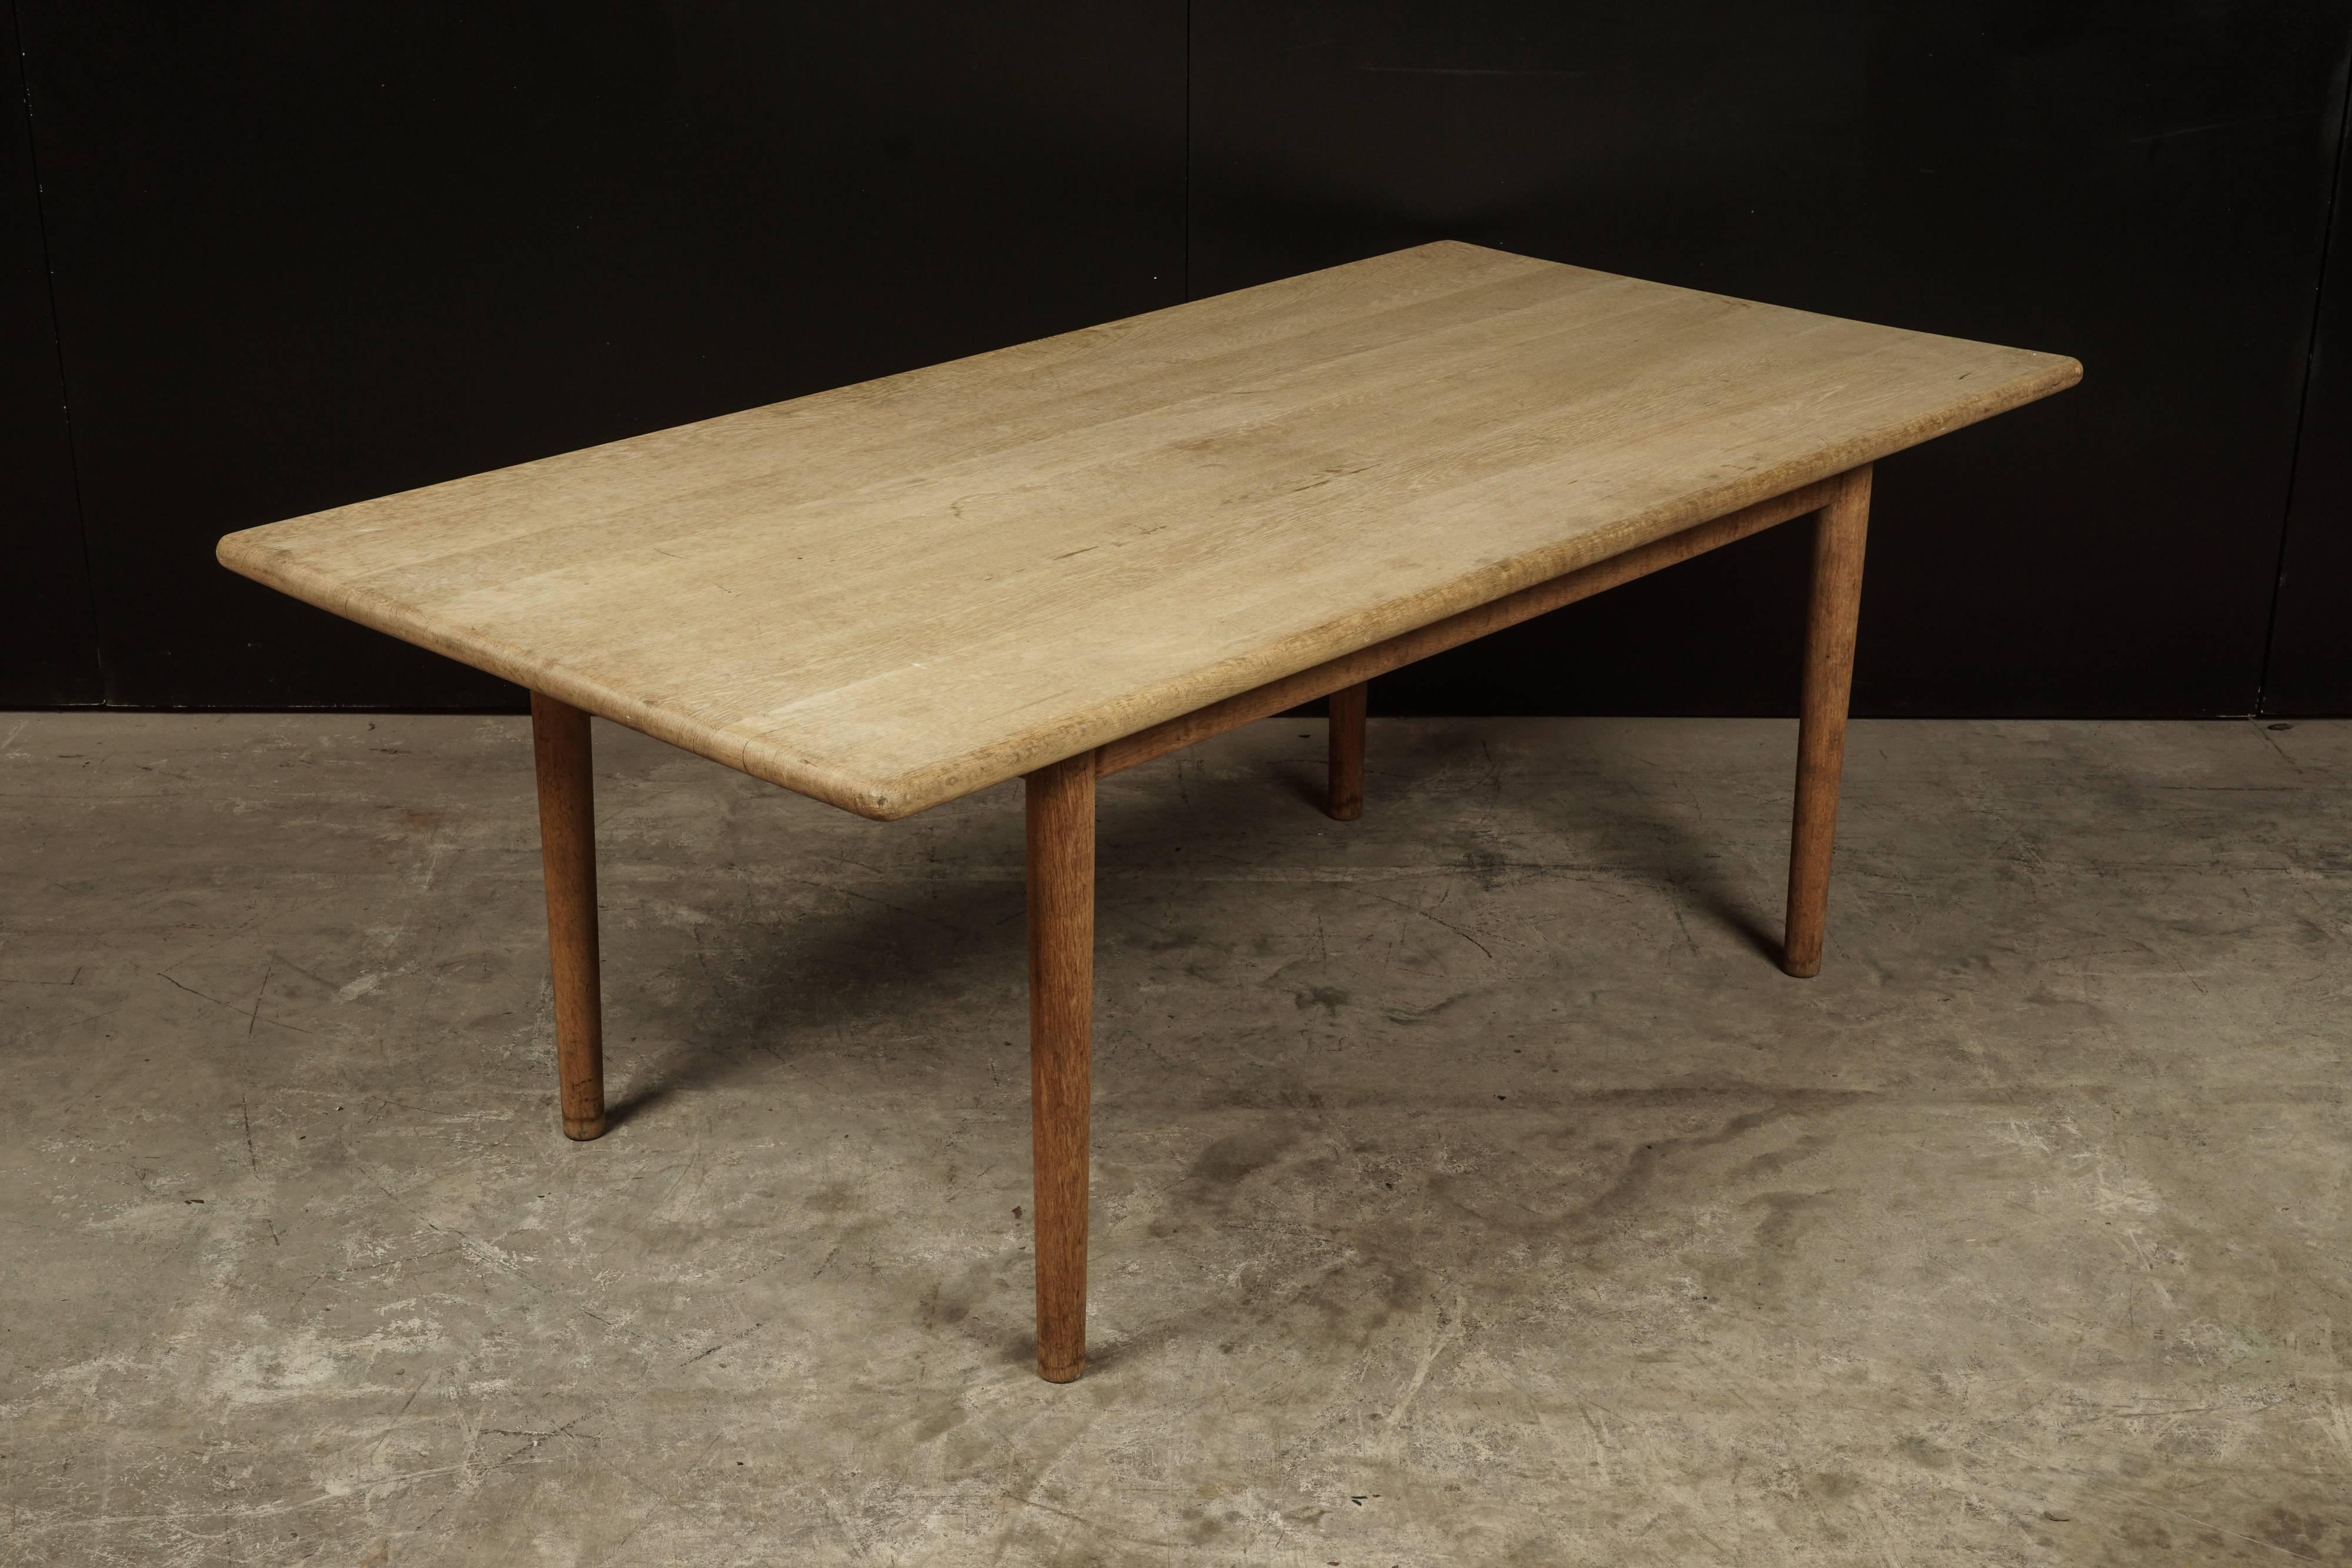 Midcentury coffee table designed by Hans Wegner, circa 1960. Manufactured by GETAMA, Denmark. Solid oak construction. Manufacturer's mark underneath.